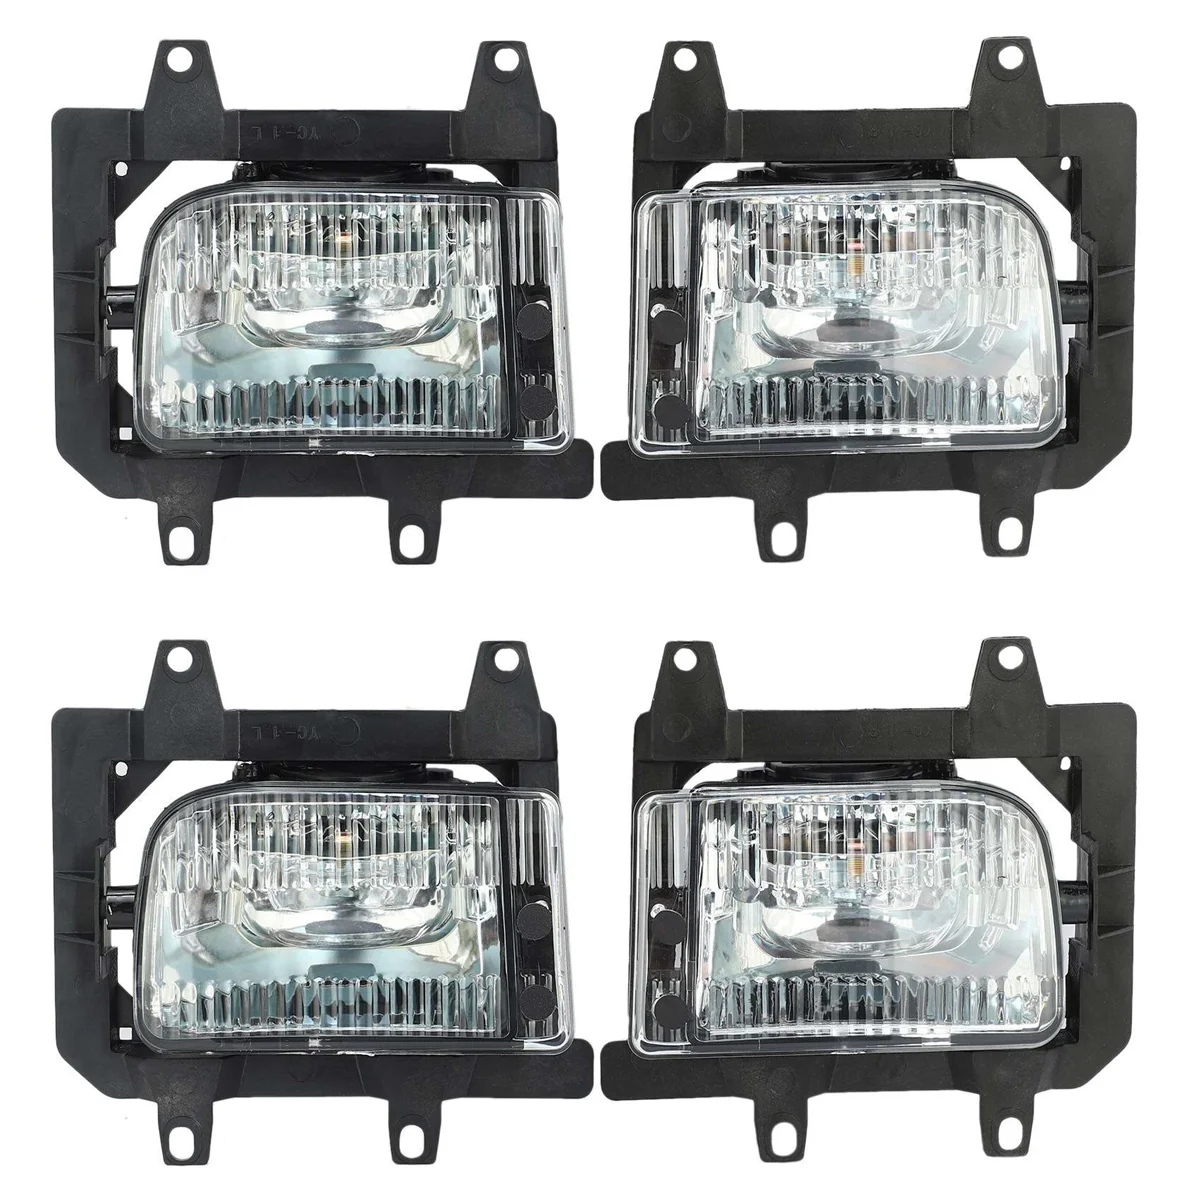 

4Pcs Crystal Clear Lens Cover Front Bumper Fog Light Lamps House for Bmw E30 318I 318is 325I 325is 325E 325Es 325Ix